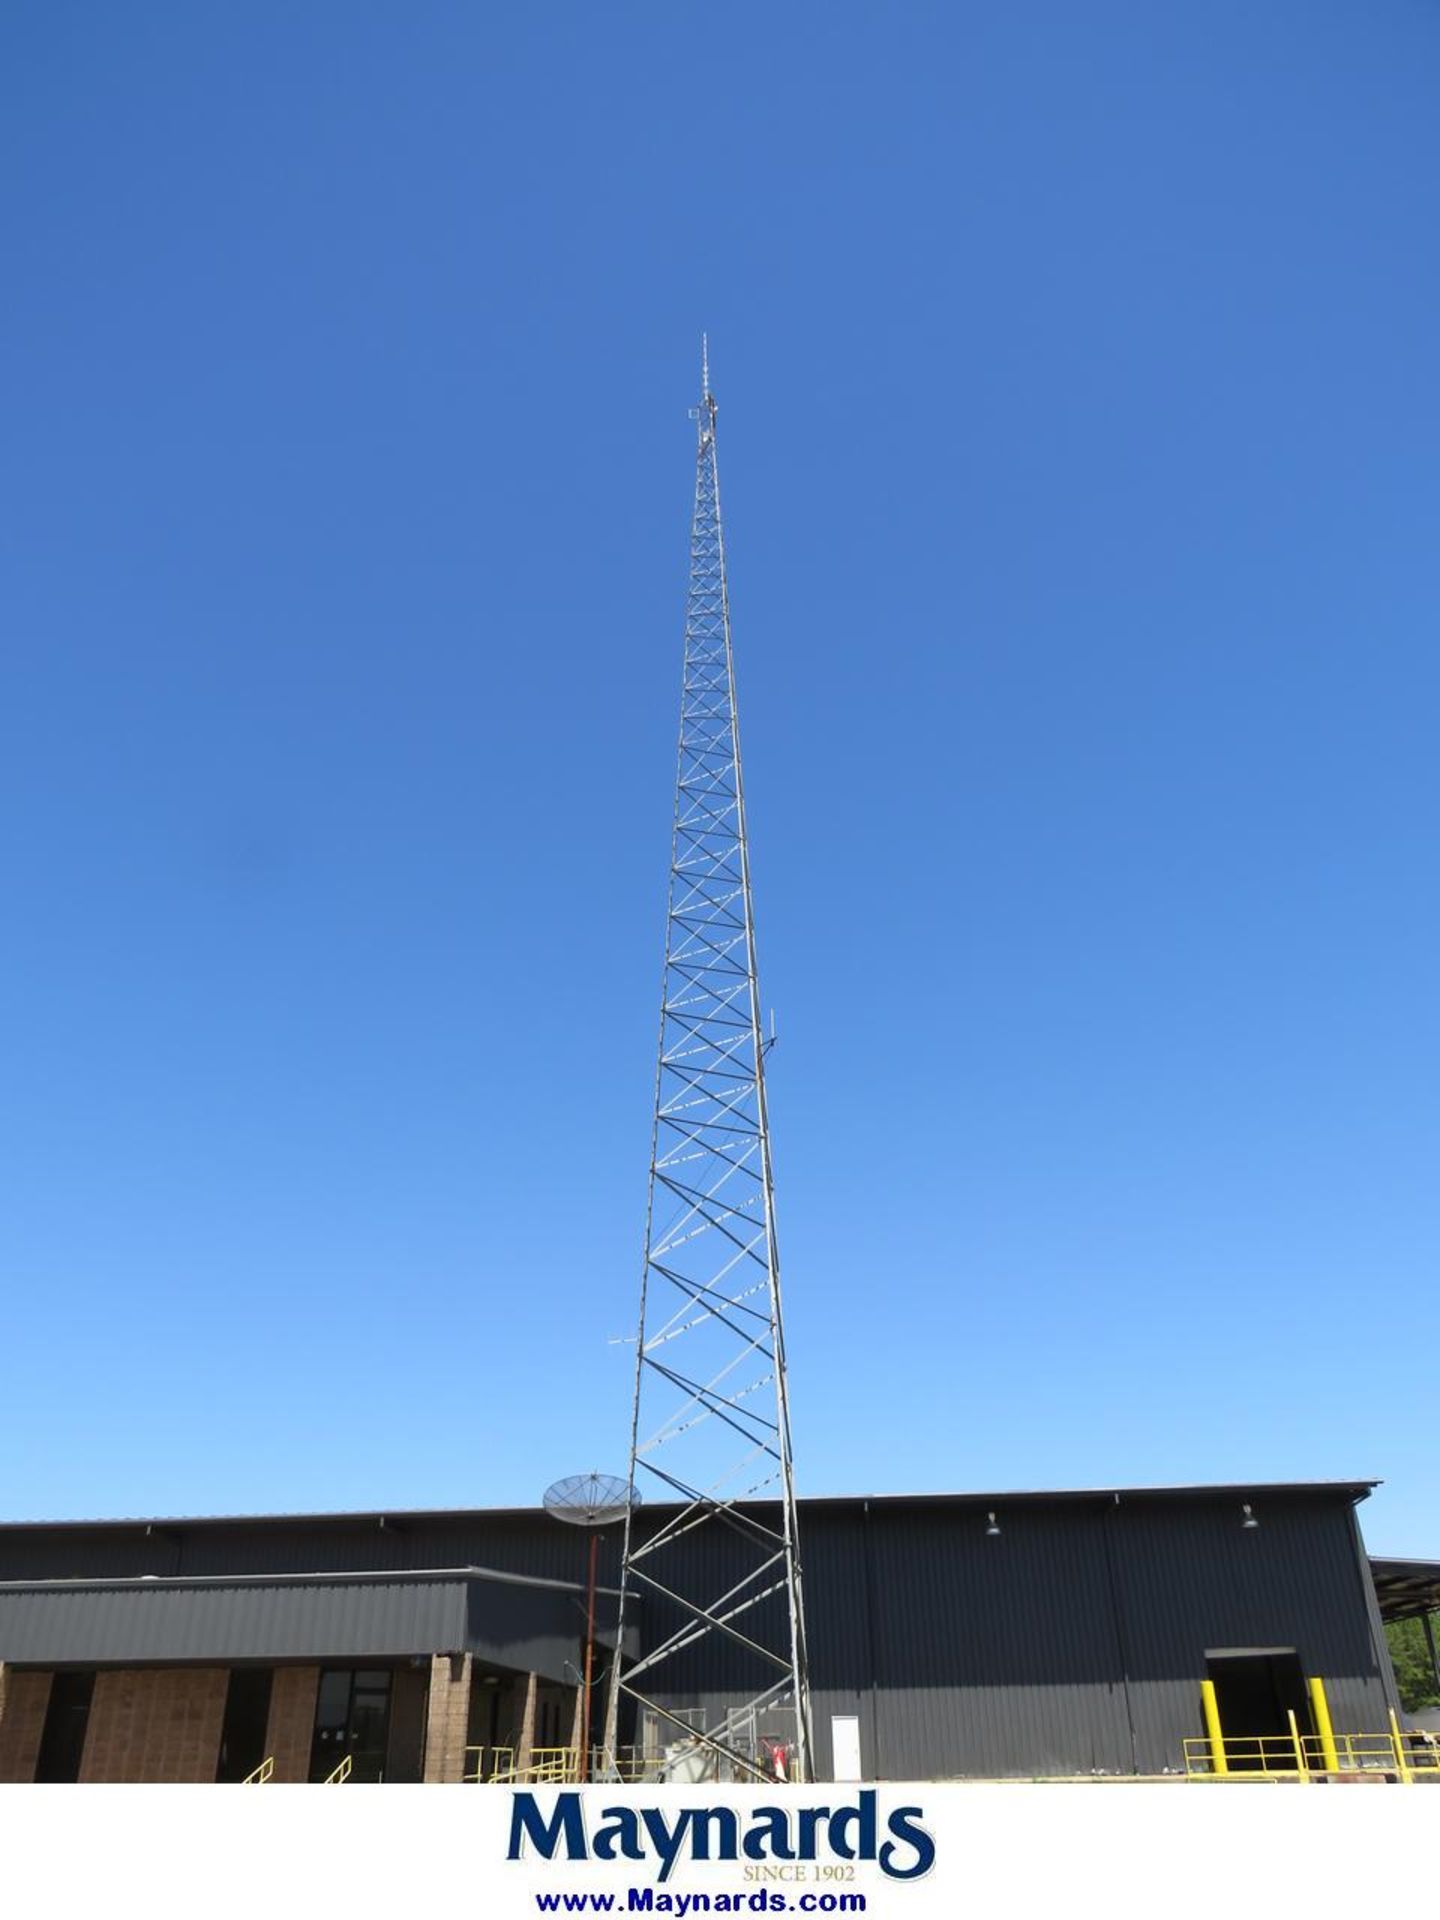 Approx. 200' High Communications Tower - Image 2 of 8